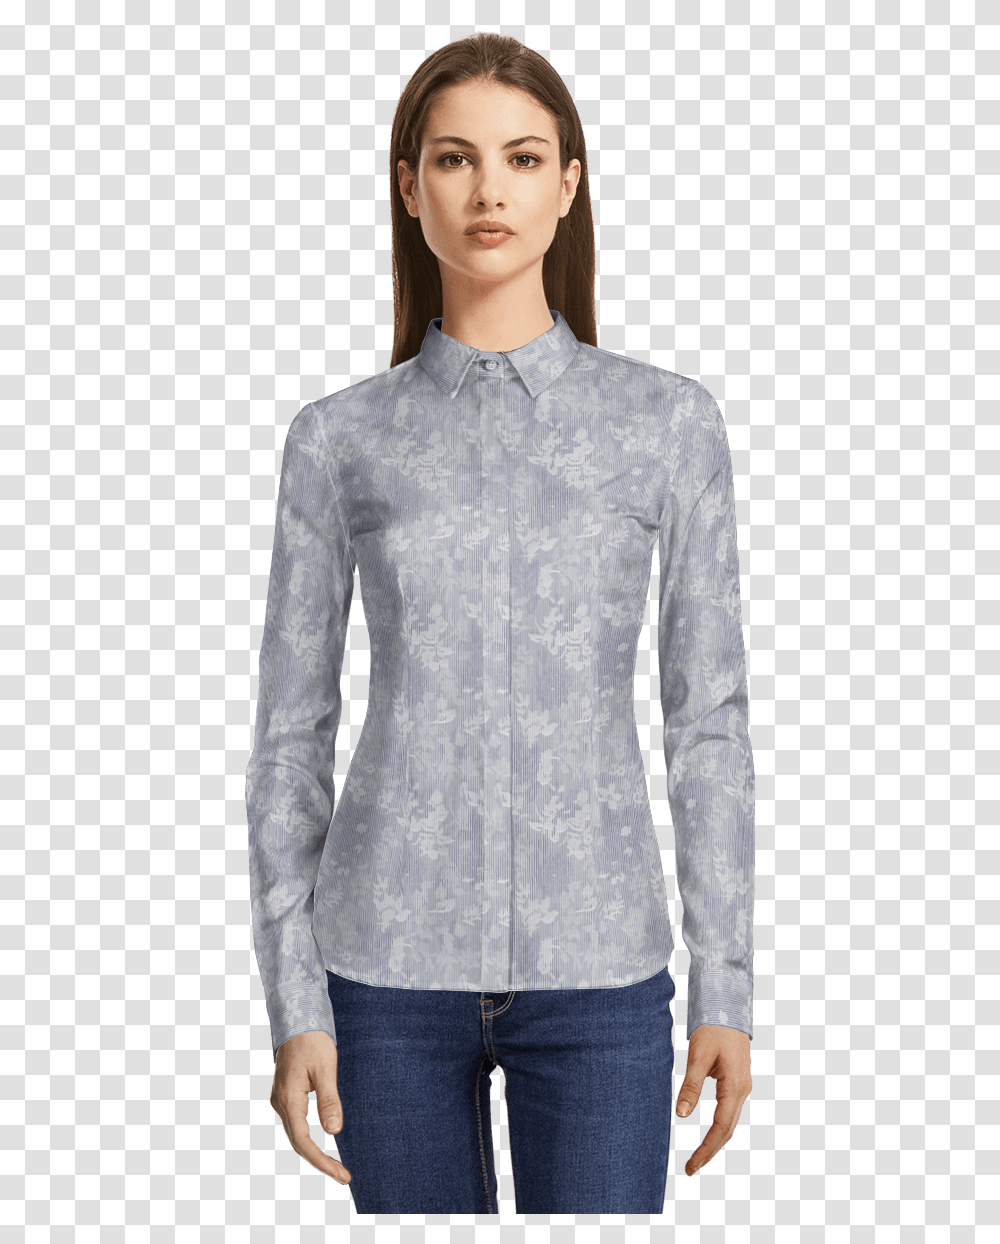 Shirt Collar With Stand For Women, Sleeve, Apparel, Long Sleeve Transparent Png